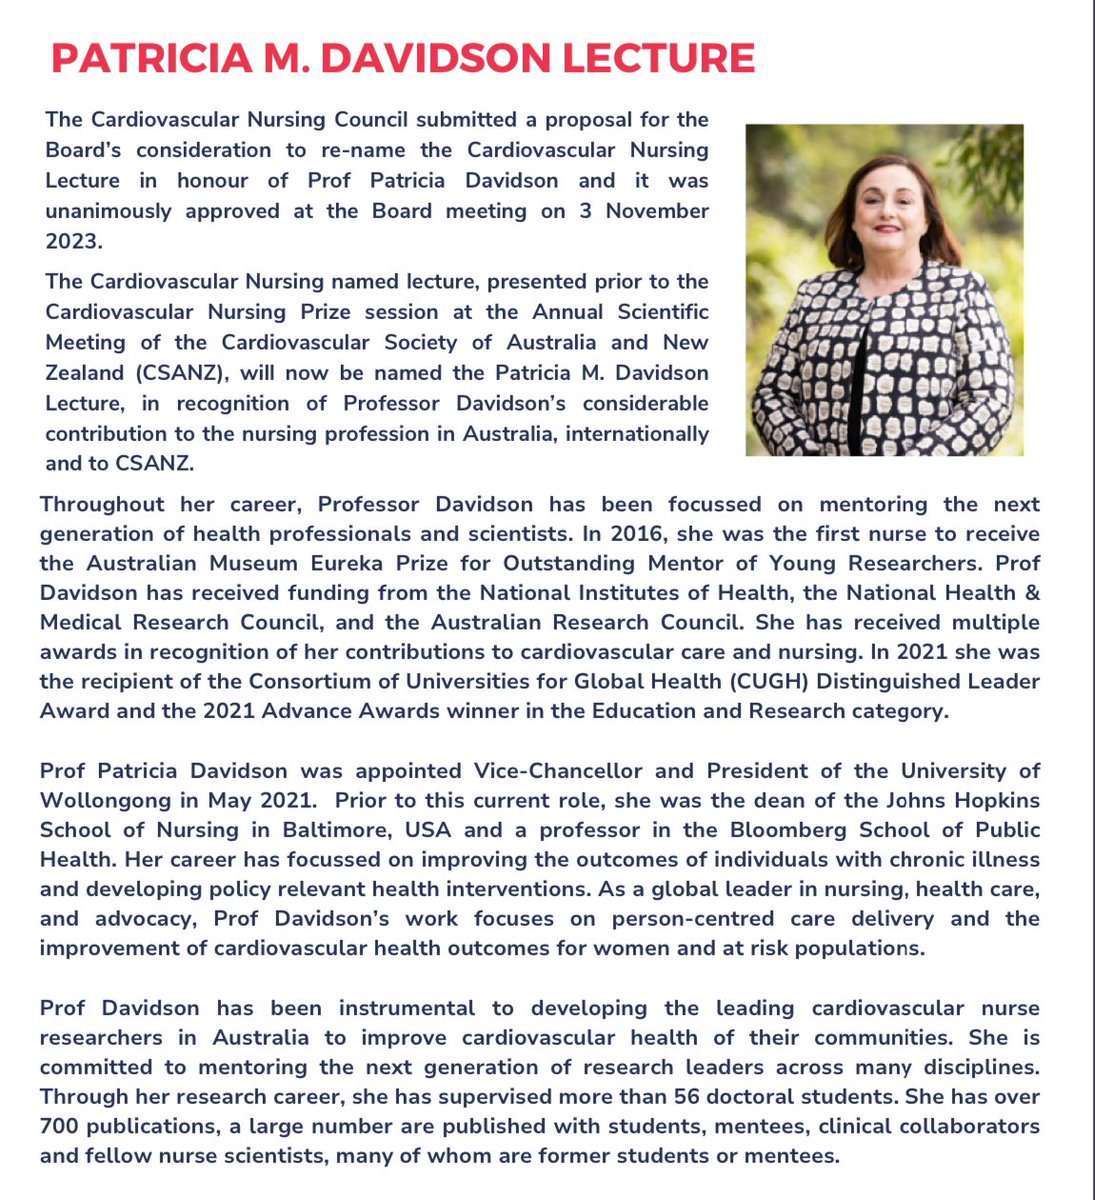 We are delighted to announce the renaming of the Cardiovascular Nursing Lecture to be the Patricia M Davidson Lecture. This will be delivered by Dr @aw_conway in Perth, August 2024.